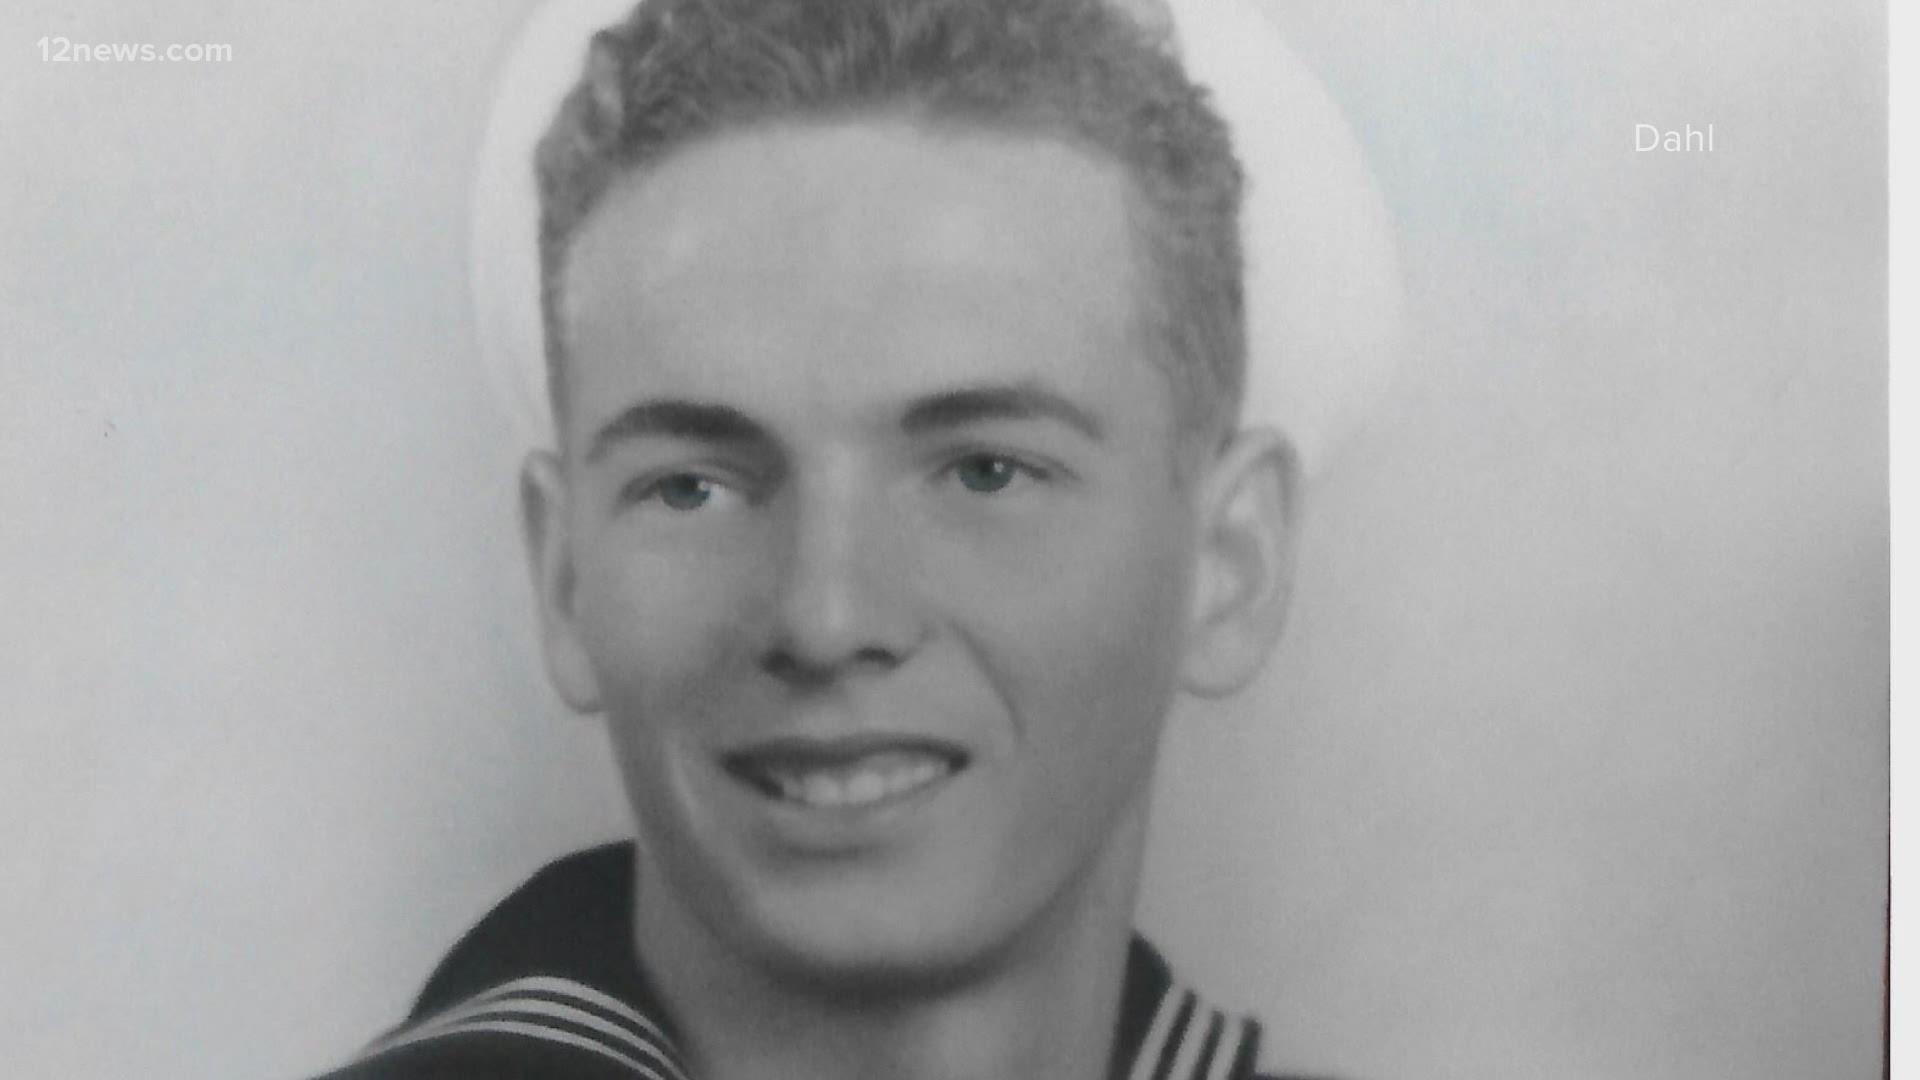 Carl Johnson's body was lost and unidentified for nearly 80 years after the attacks on Pearl Harbor. A proper burial planned for next month.